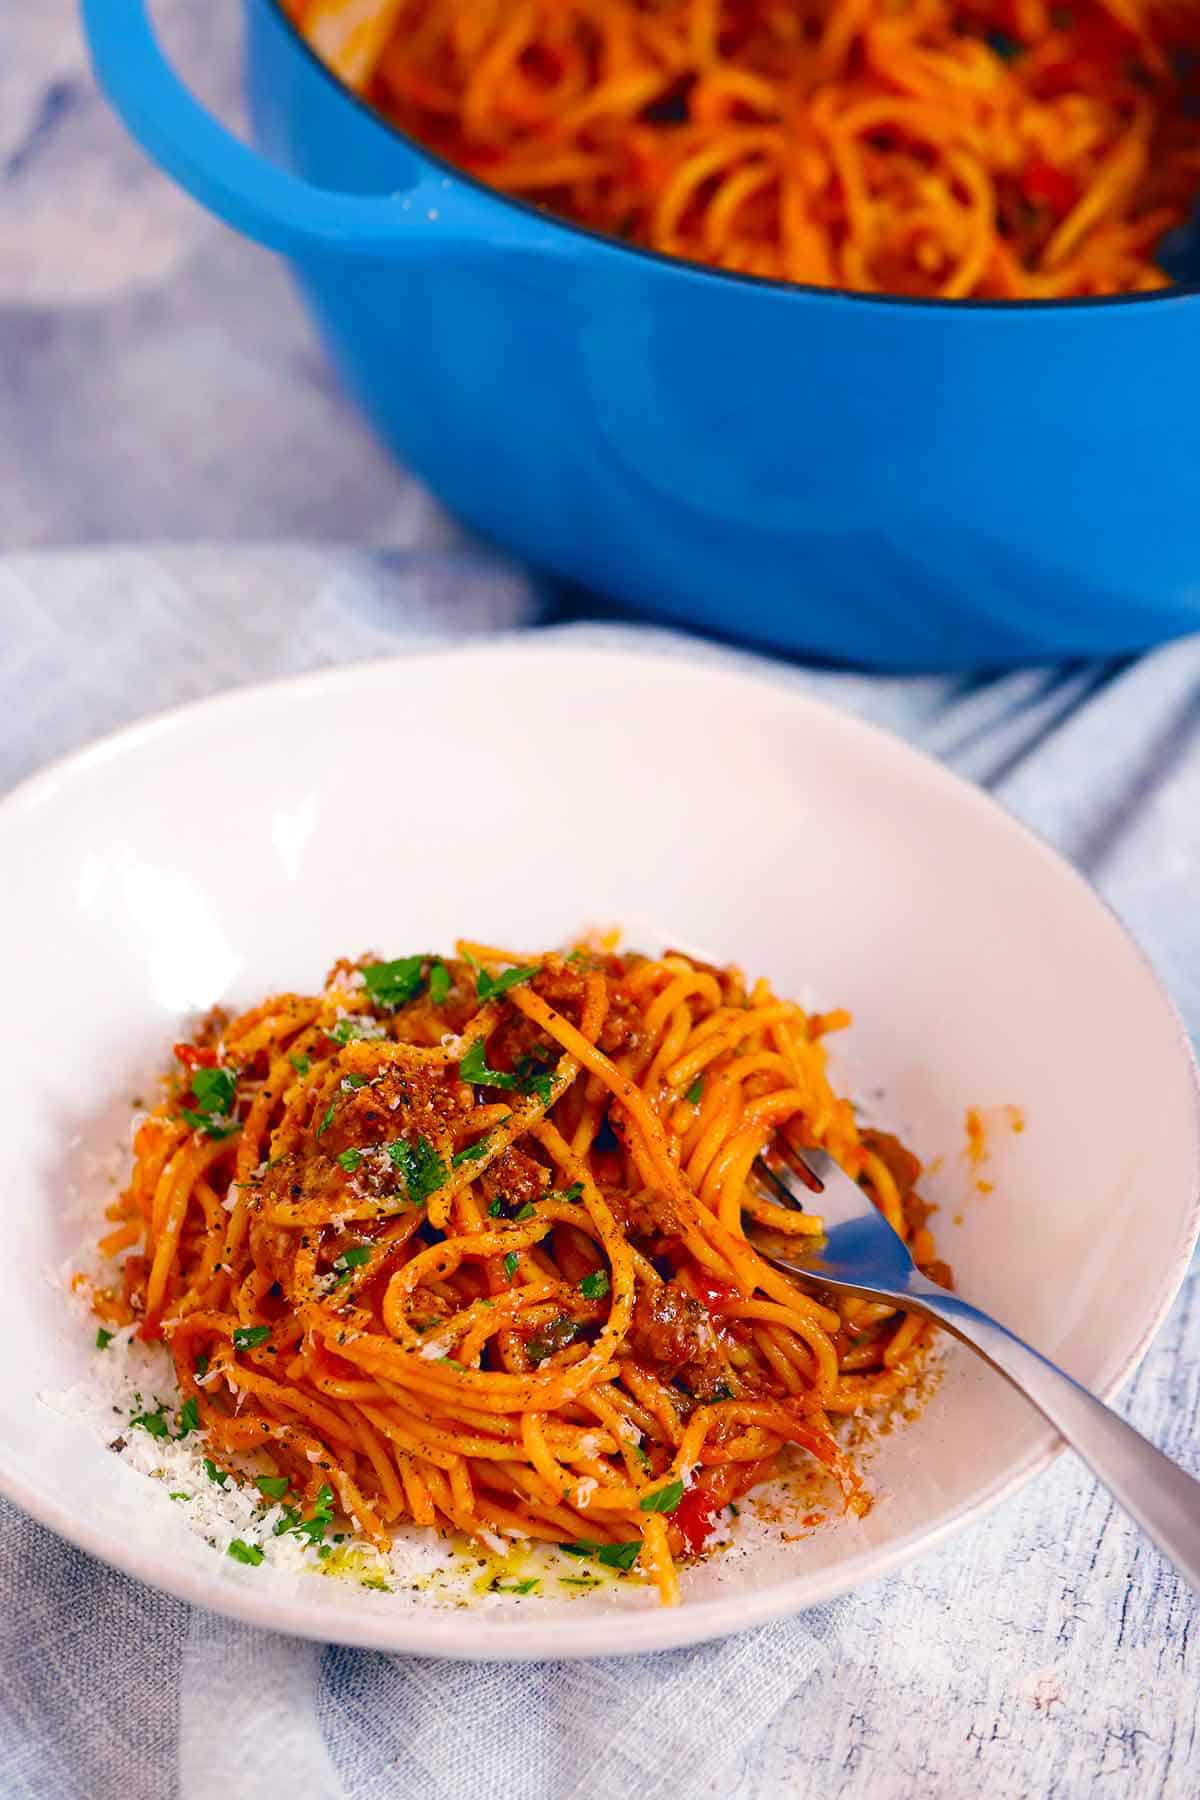 A plate of spaghetti and meat sauce in front of a blue dutch oven that has the rest of the one pot pasta recipe in it.